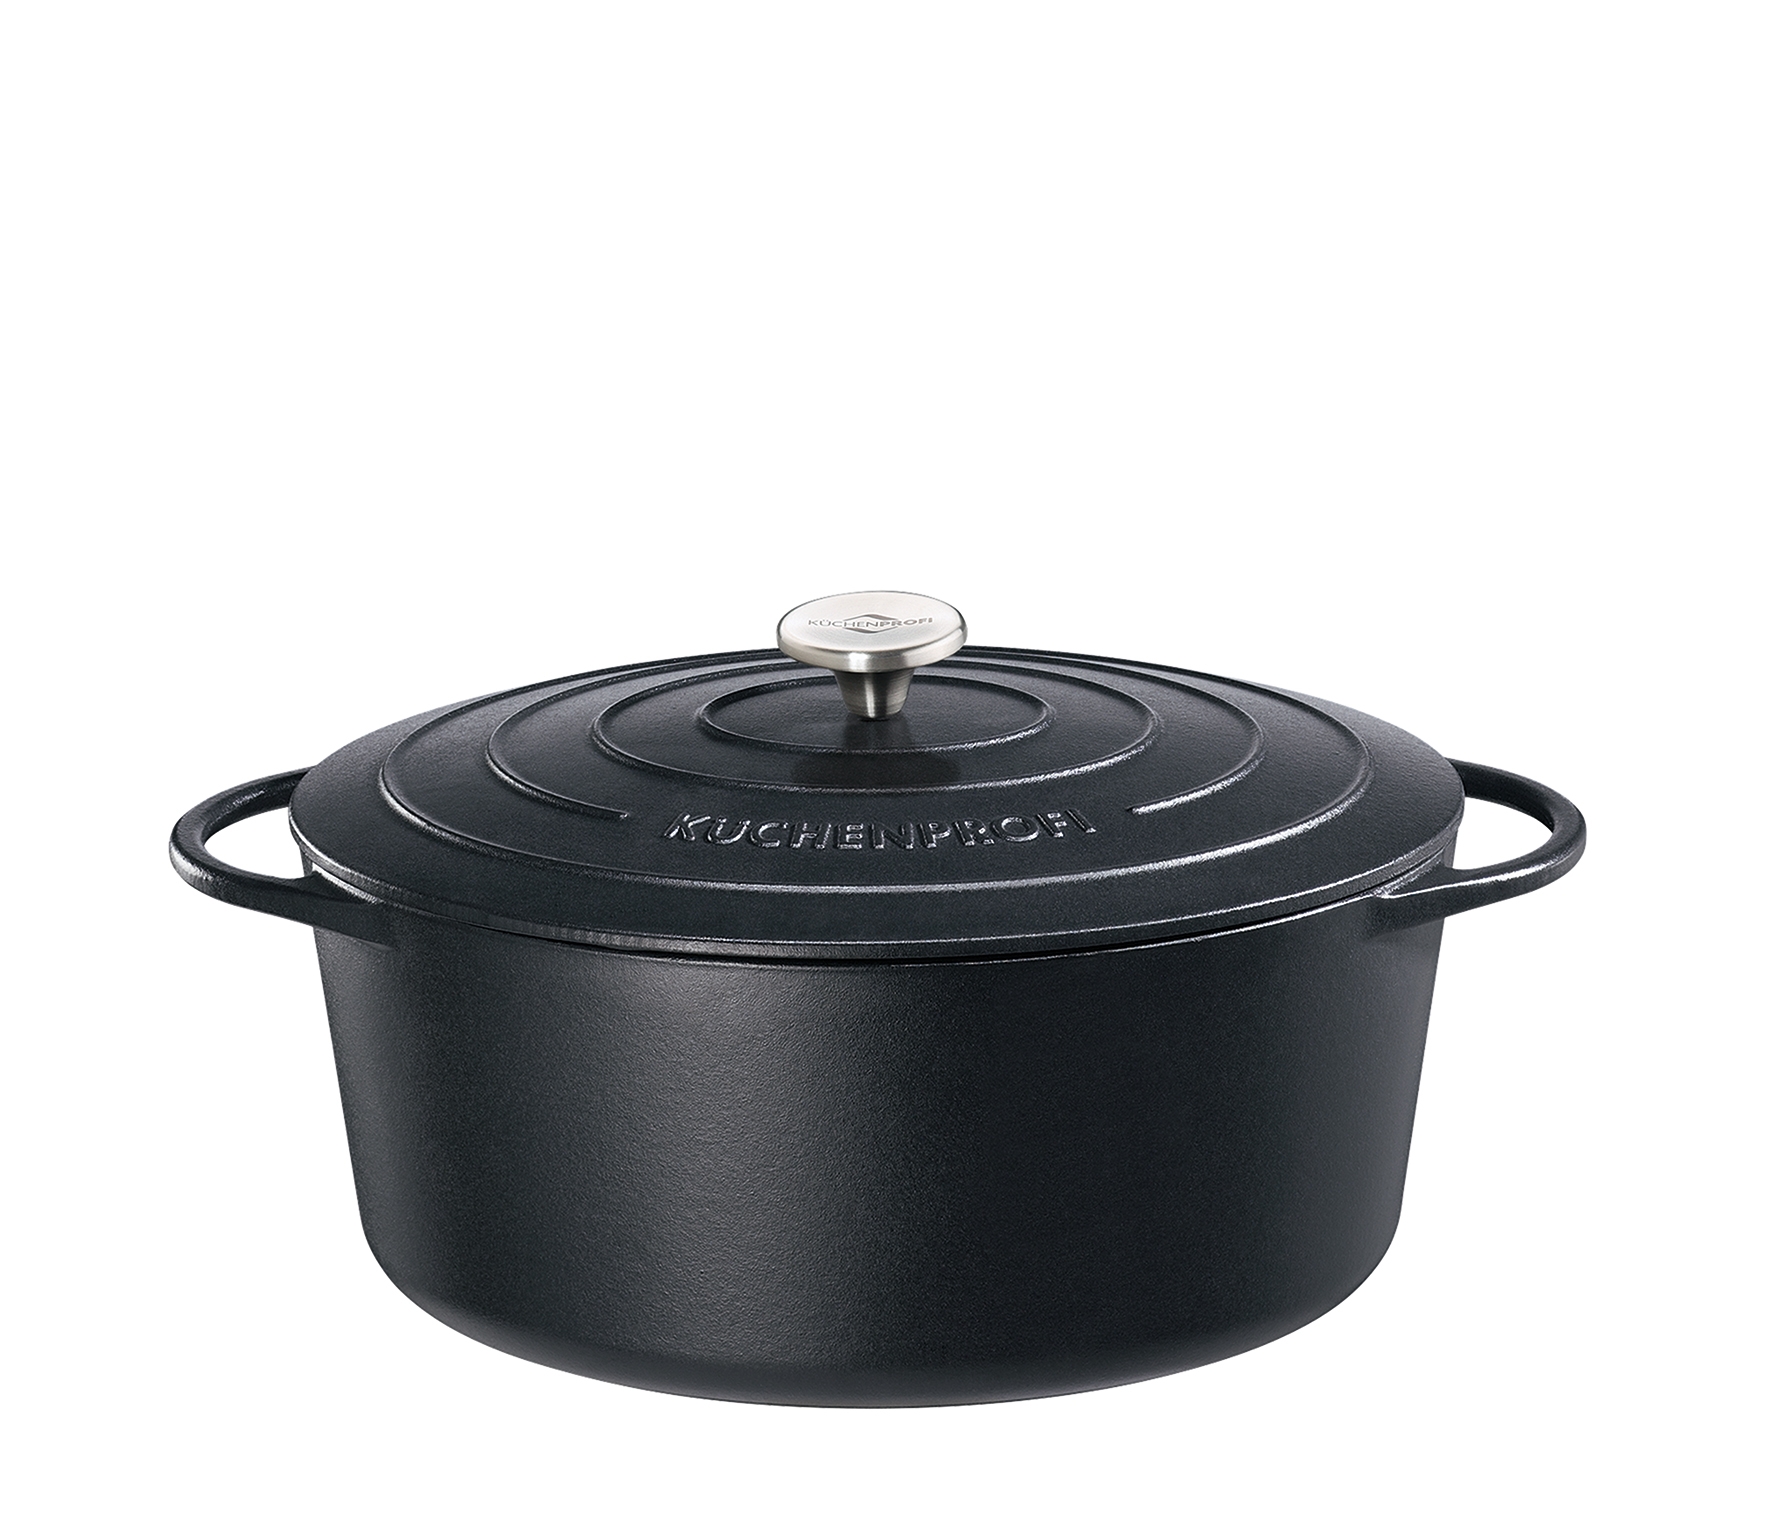 Bratentopf oval mit Gussdeckel PROVENCE 35 black emailliertes Gusseisen + energiesparend, 8,9l 